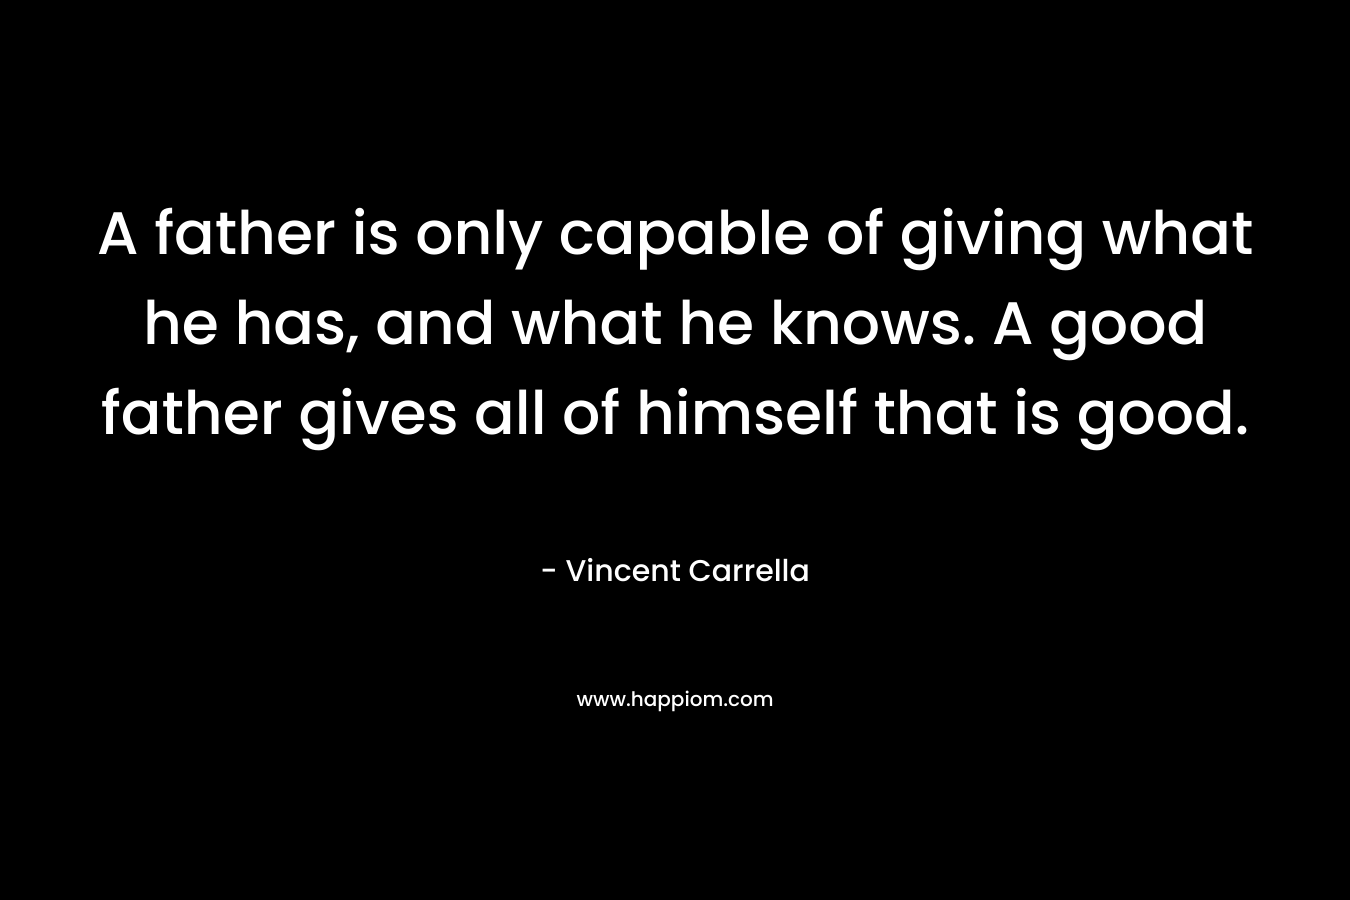 A father is only capable of giving what he has, and what he knows. A good father gives all of himself that is good.